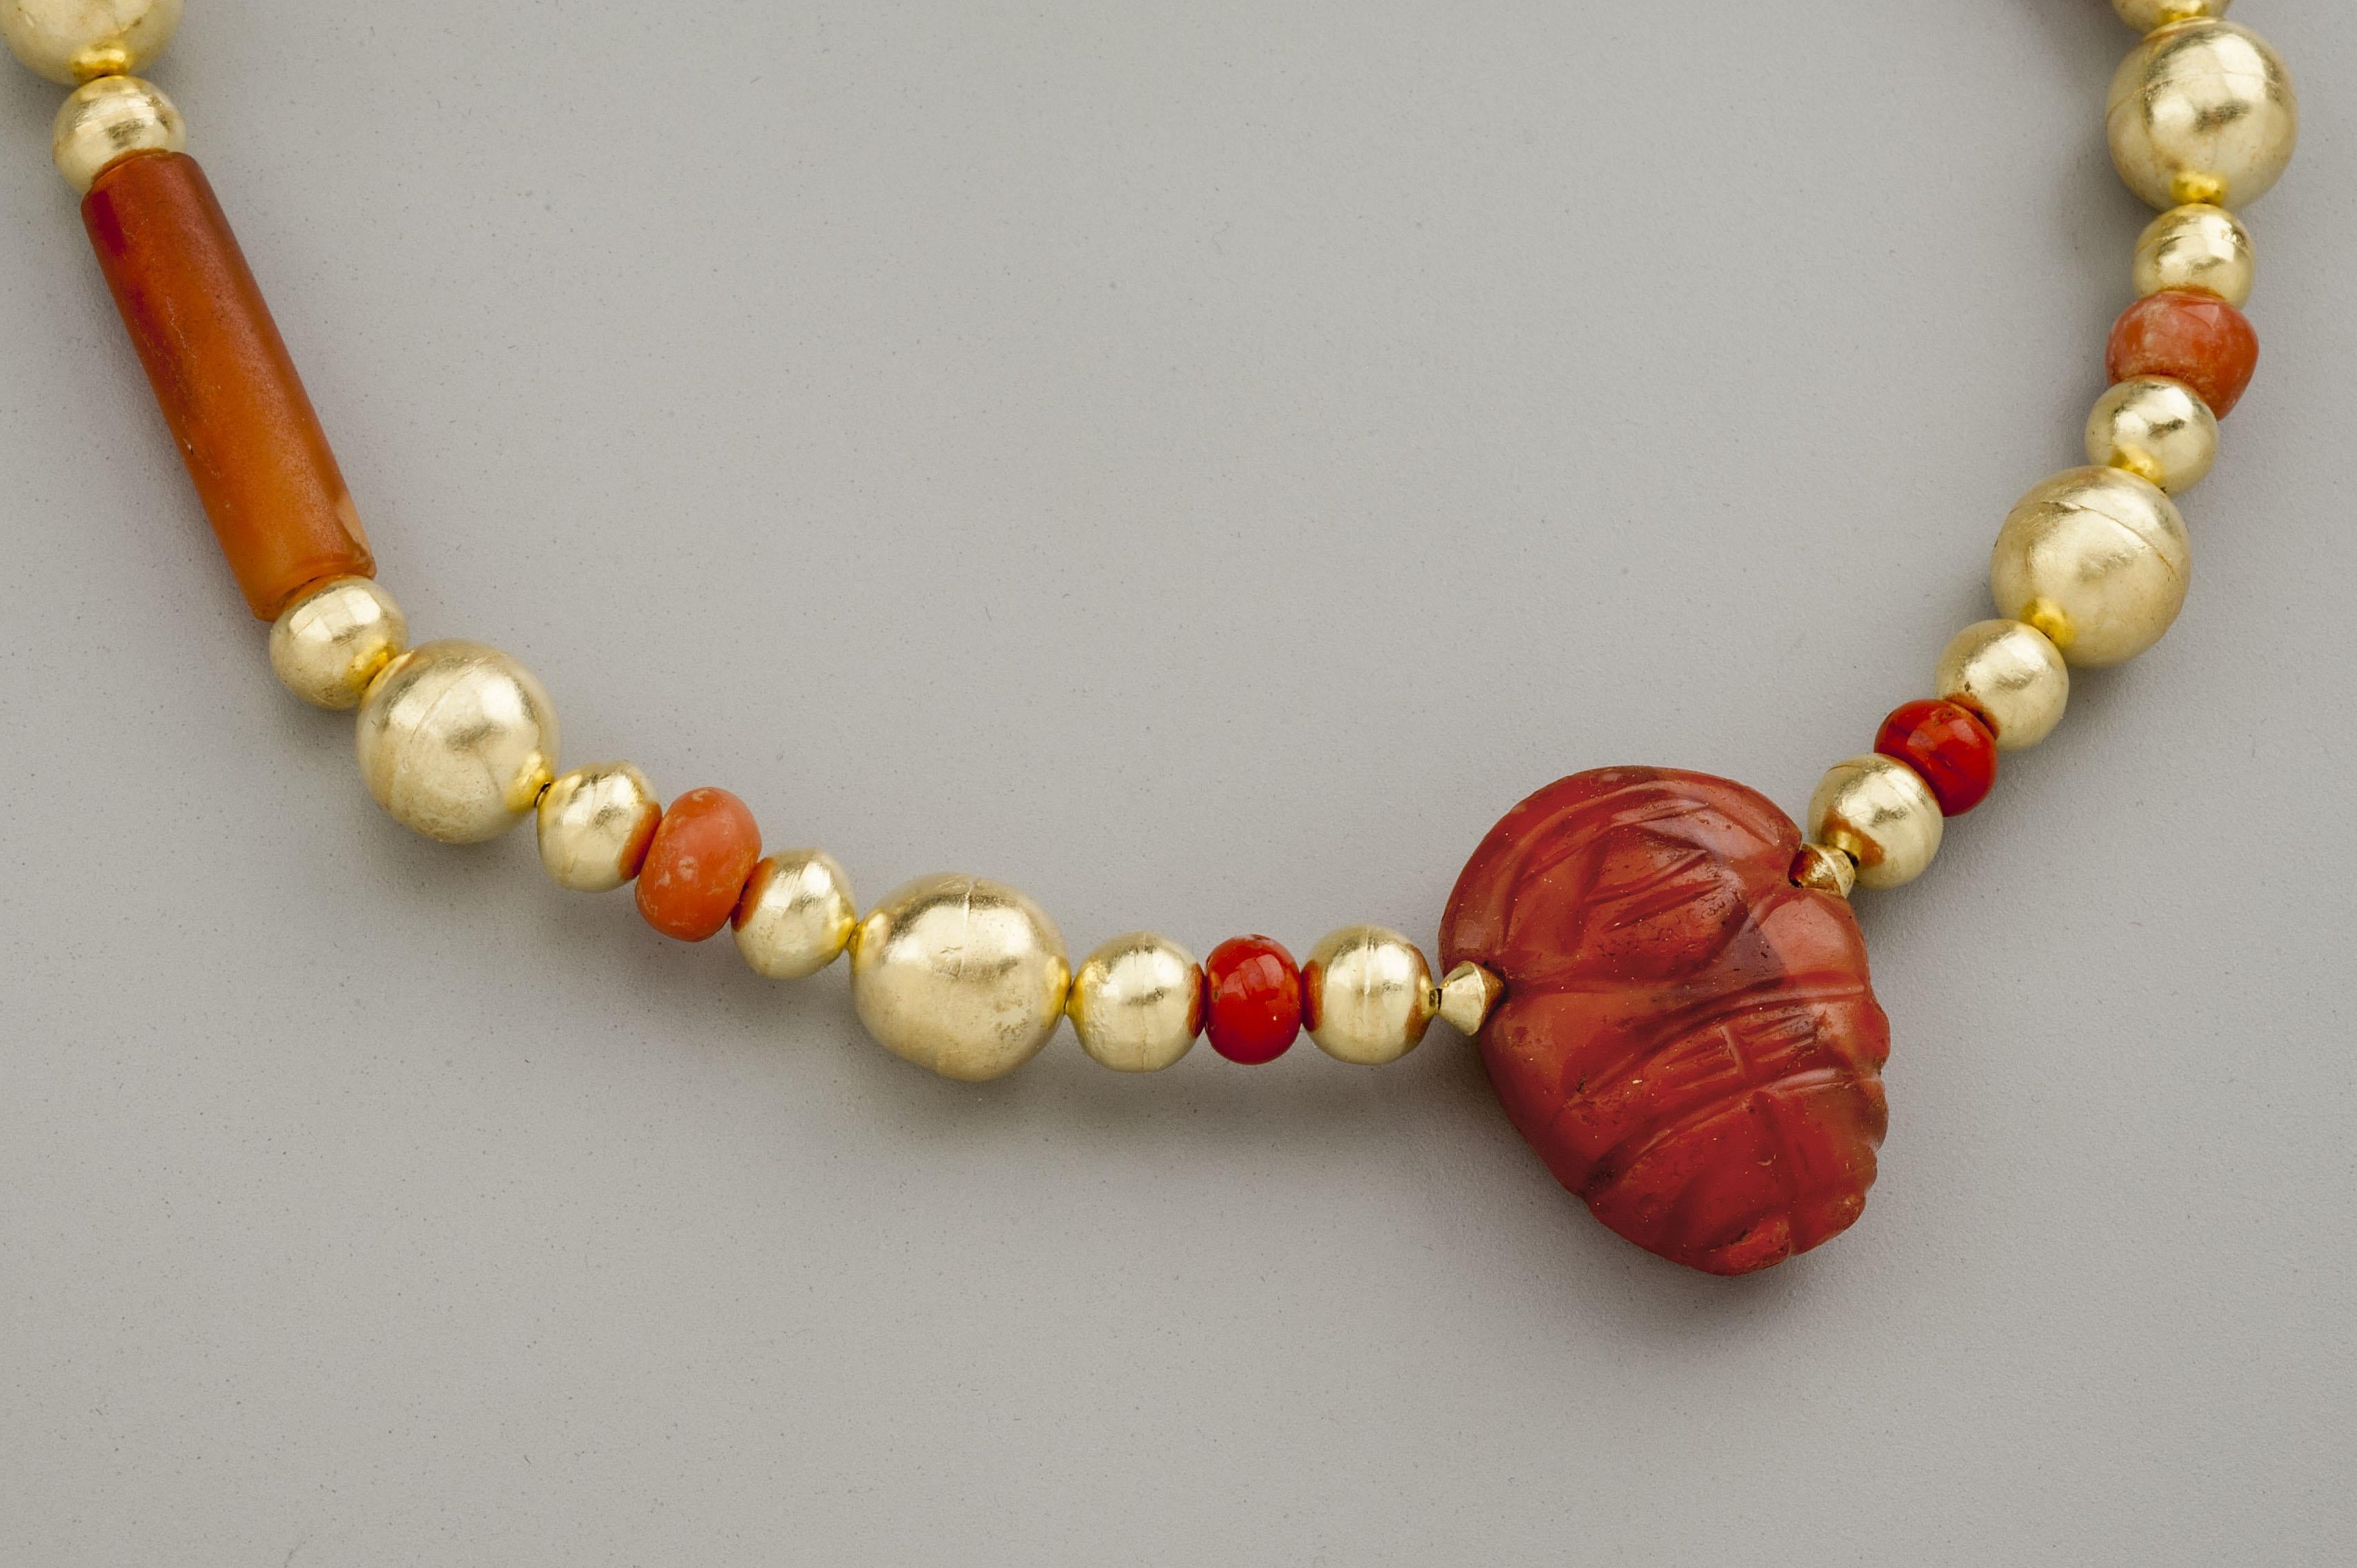 Twenty-eight round gold beads with ten carnelian beads, eight of which are flattened spheres and two are cylindrical tubes, with a carnelian bean shaped effigy of a of a man, presumably a chief. The stone pieces are said to be from the Tairona